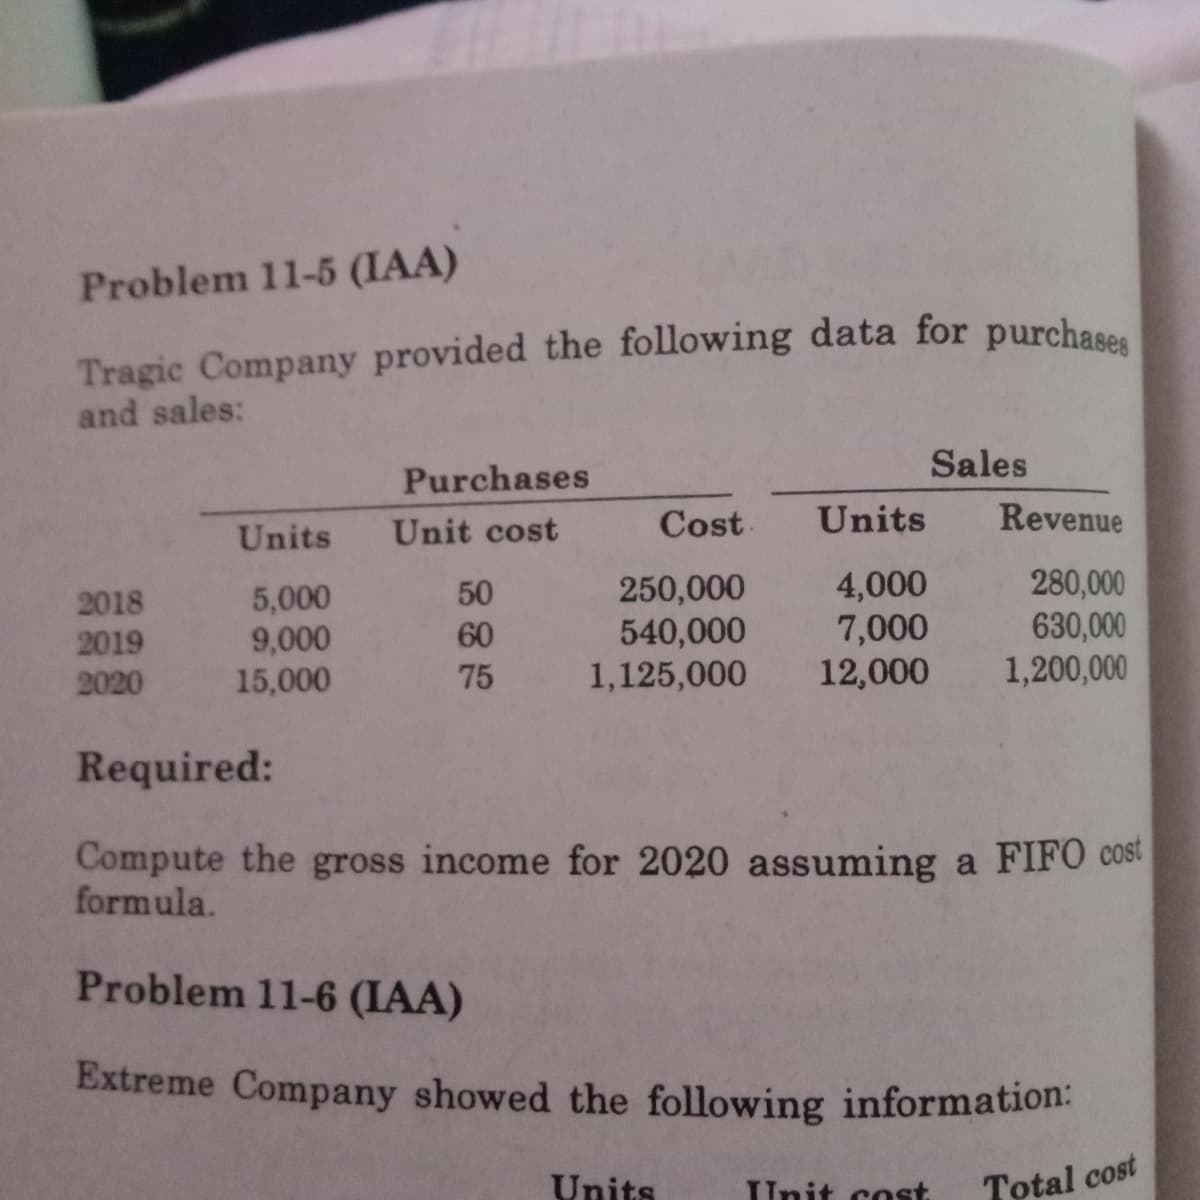 Problem 11-5 (IAA)
Tragic Company provided the following data for purchases
and sales:
Sales
Purchases
Unit cost
Cost.
Units
Revenue
Units
250,000
540,000
1,125,000
4,000
7,000
12,000
280,000
630,000
1,200,000
50
2018
2019
5,000
9,000
15,000
60
2020
75
Required:
Compute the gross income for 2020 assuming a FIFO cost
formula.
Problem 11-6 (IAA)
Extreme Company showed the following information:
Units
Total cost
Unit const
